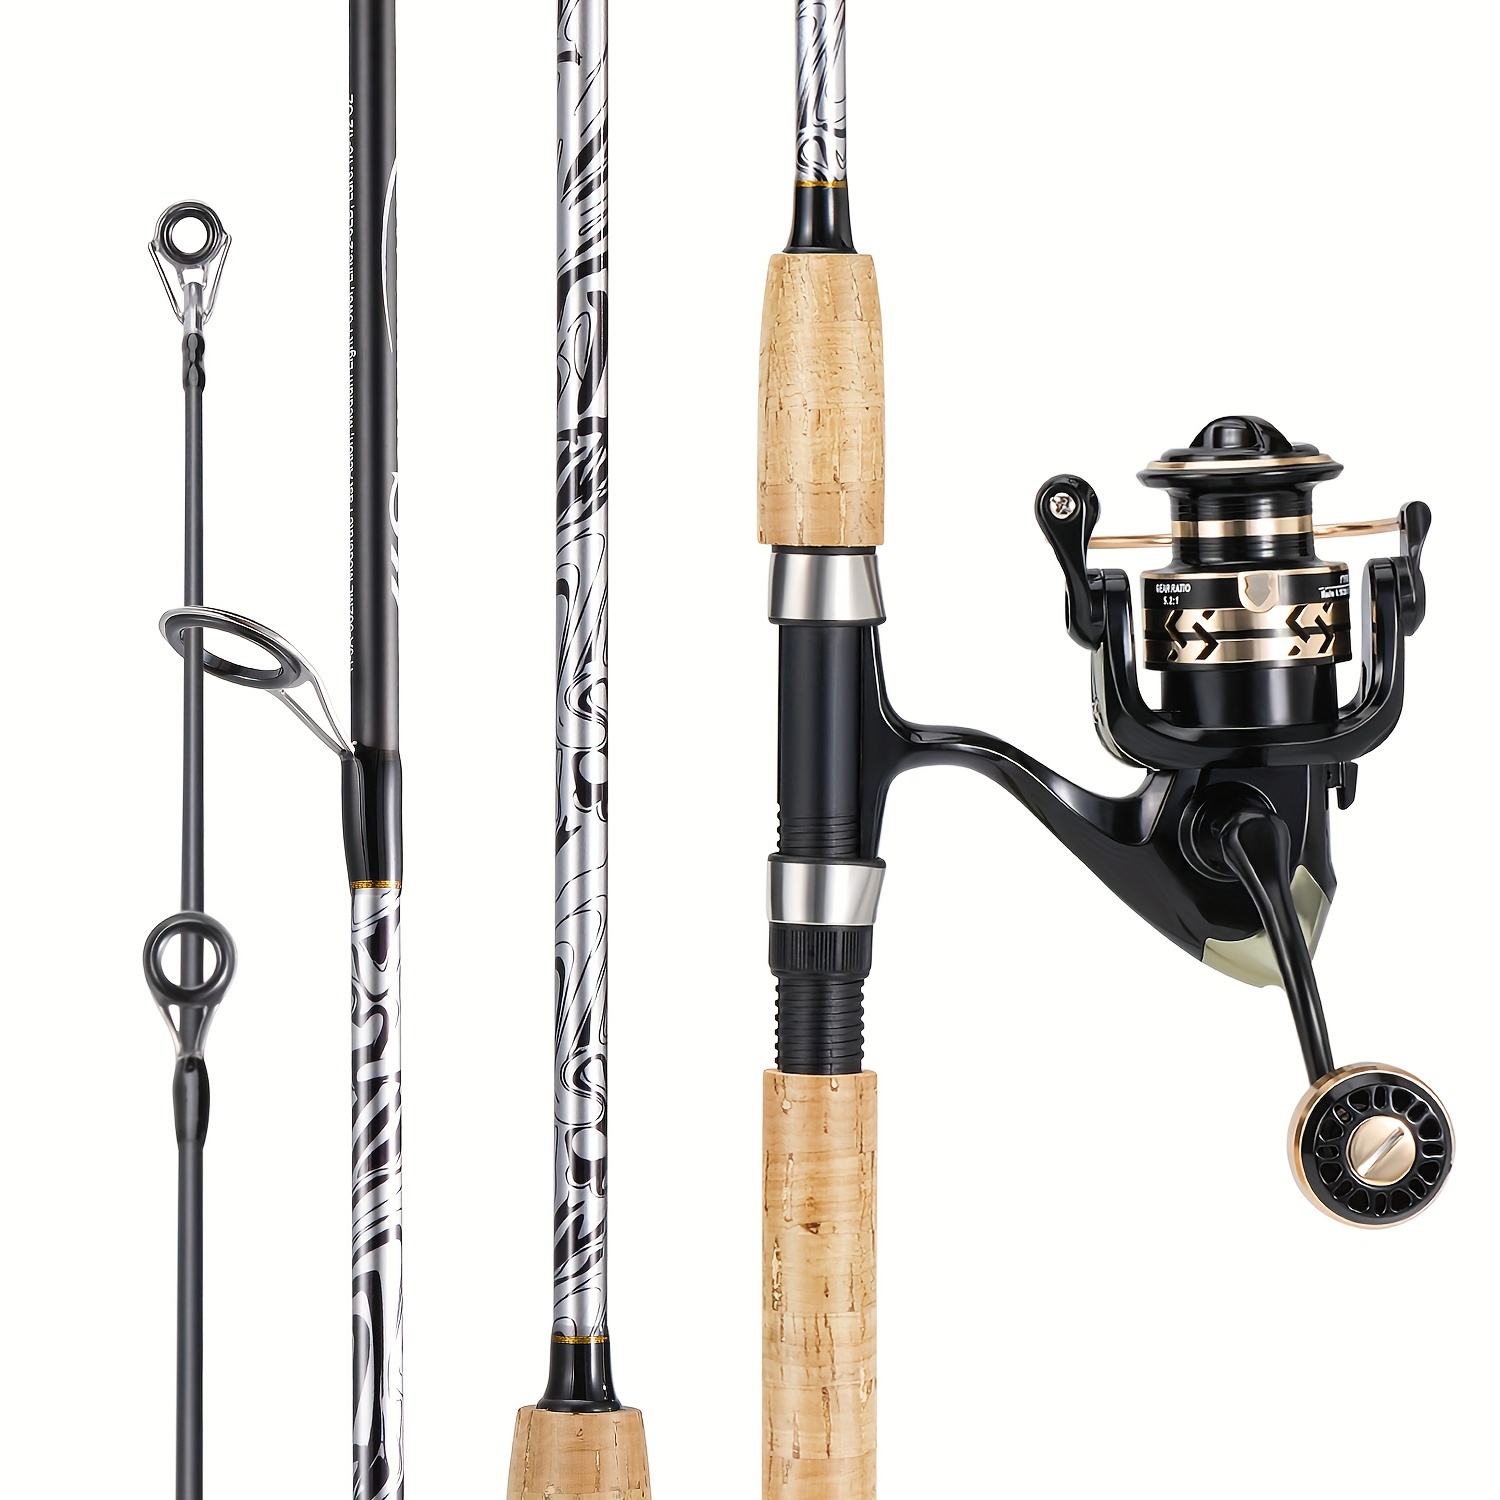 Buy fishing rod and reel combos Online in Brunei at Low Prices at desertcart